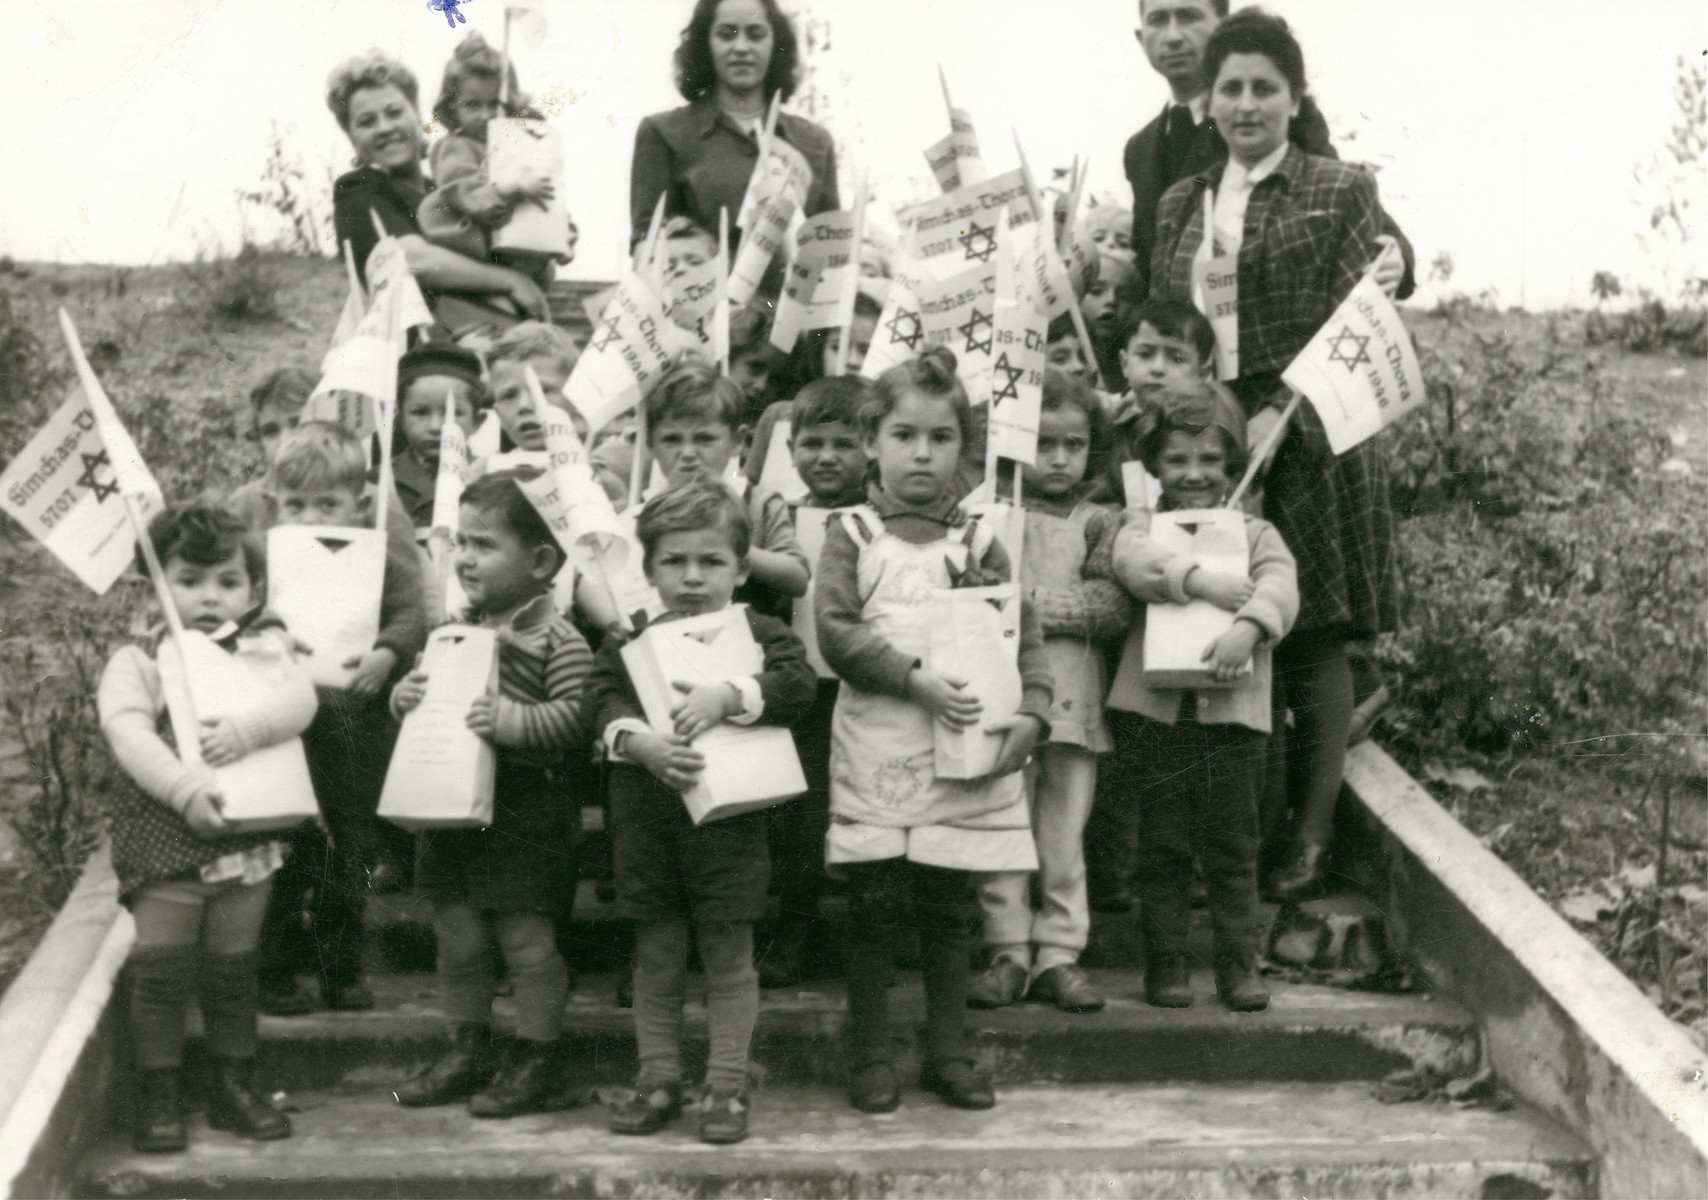 Young children carry small bags and flags during a Simchat Torah celebration in the Schlachtensee displaced persons camp.

Clara is the little girl being held by the woman on the far left, back row.